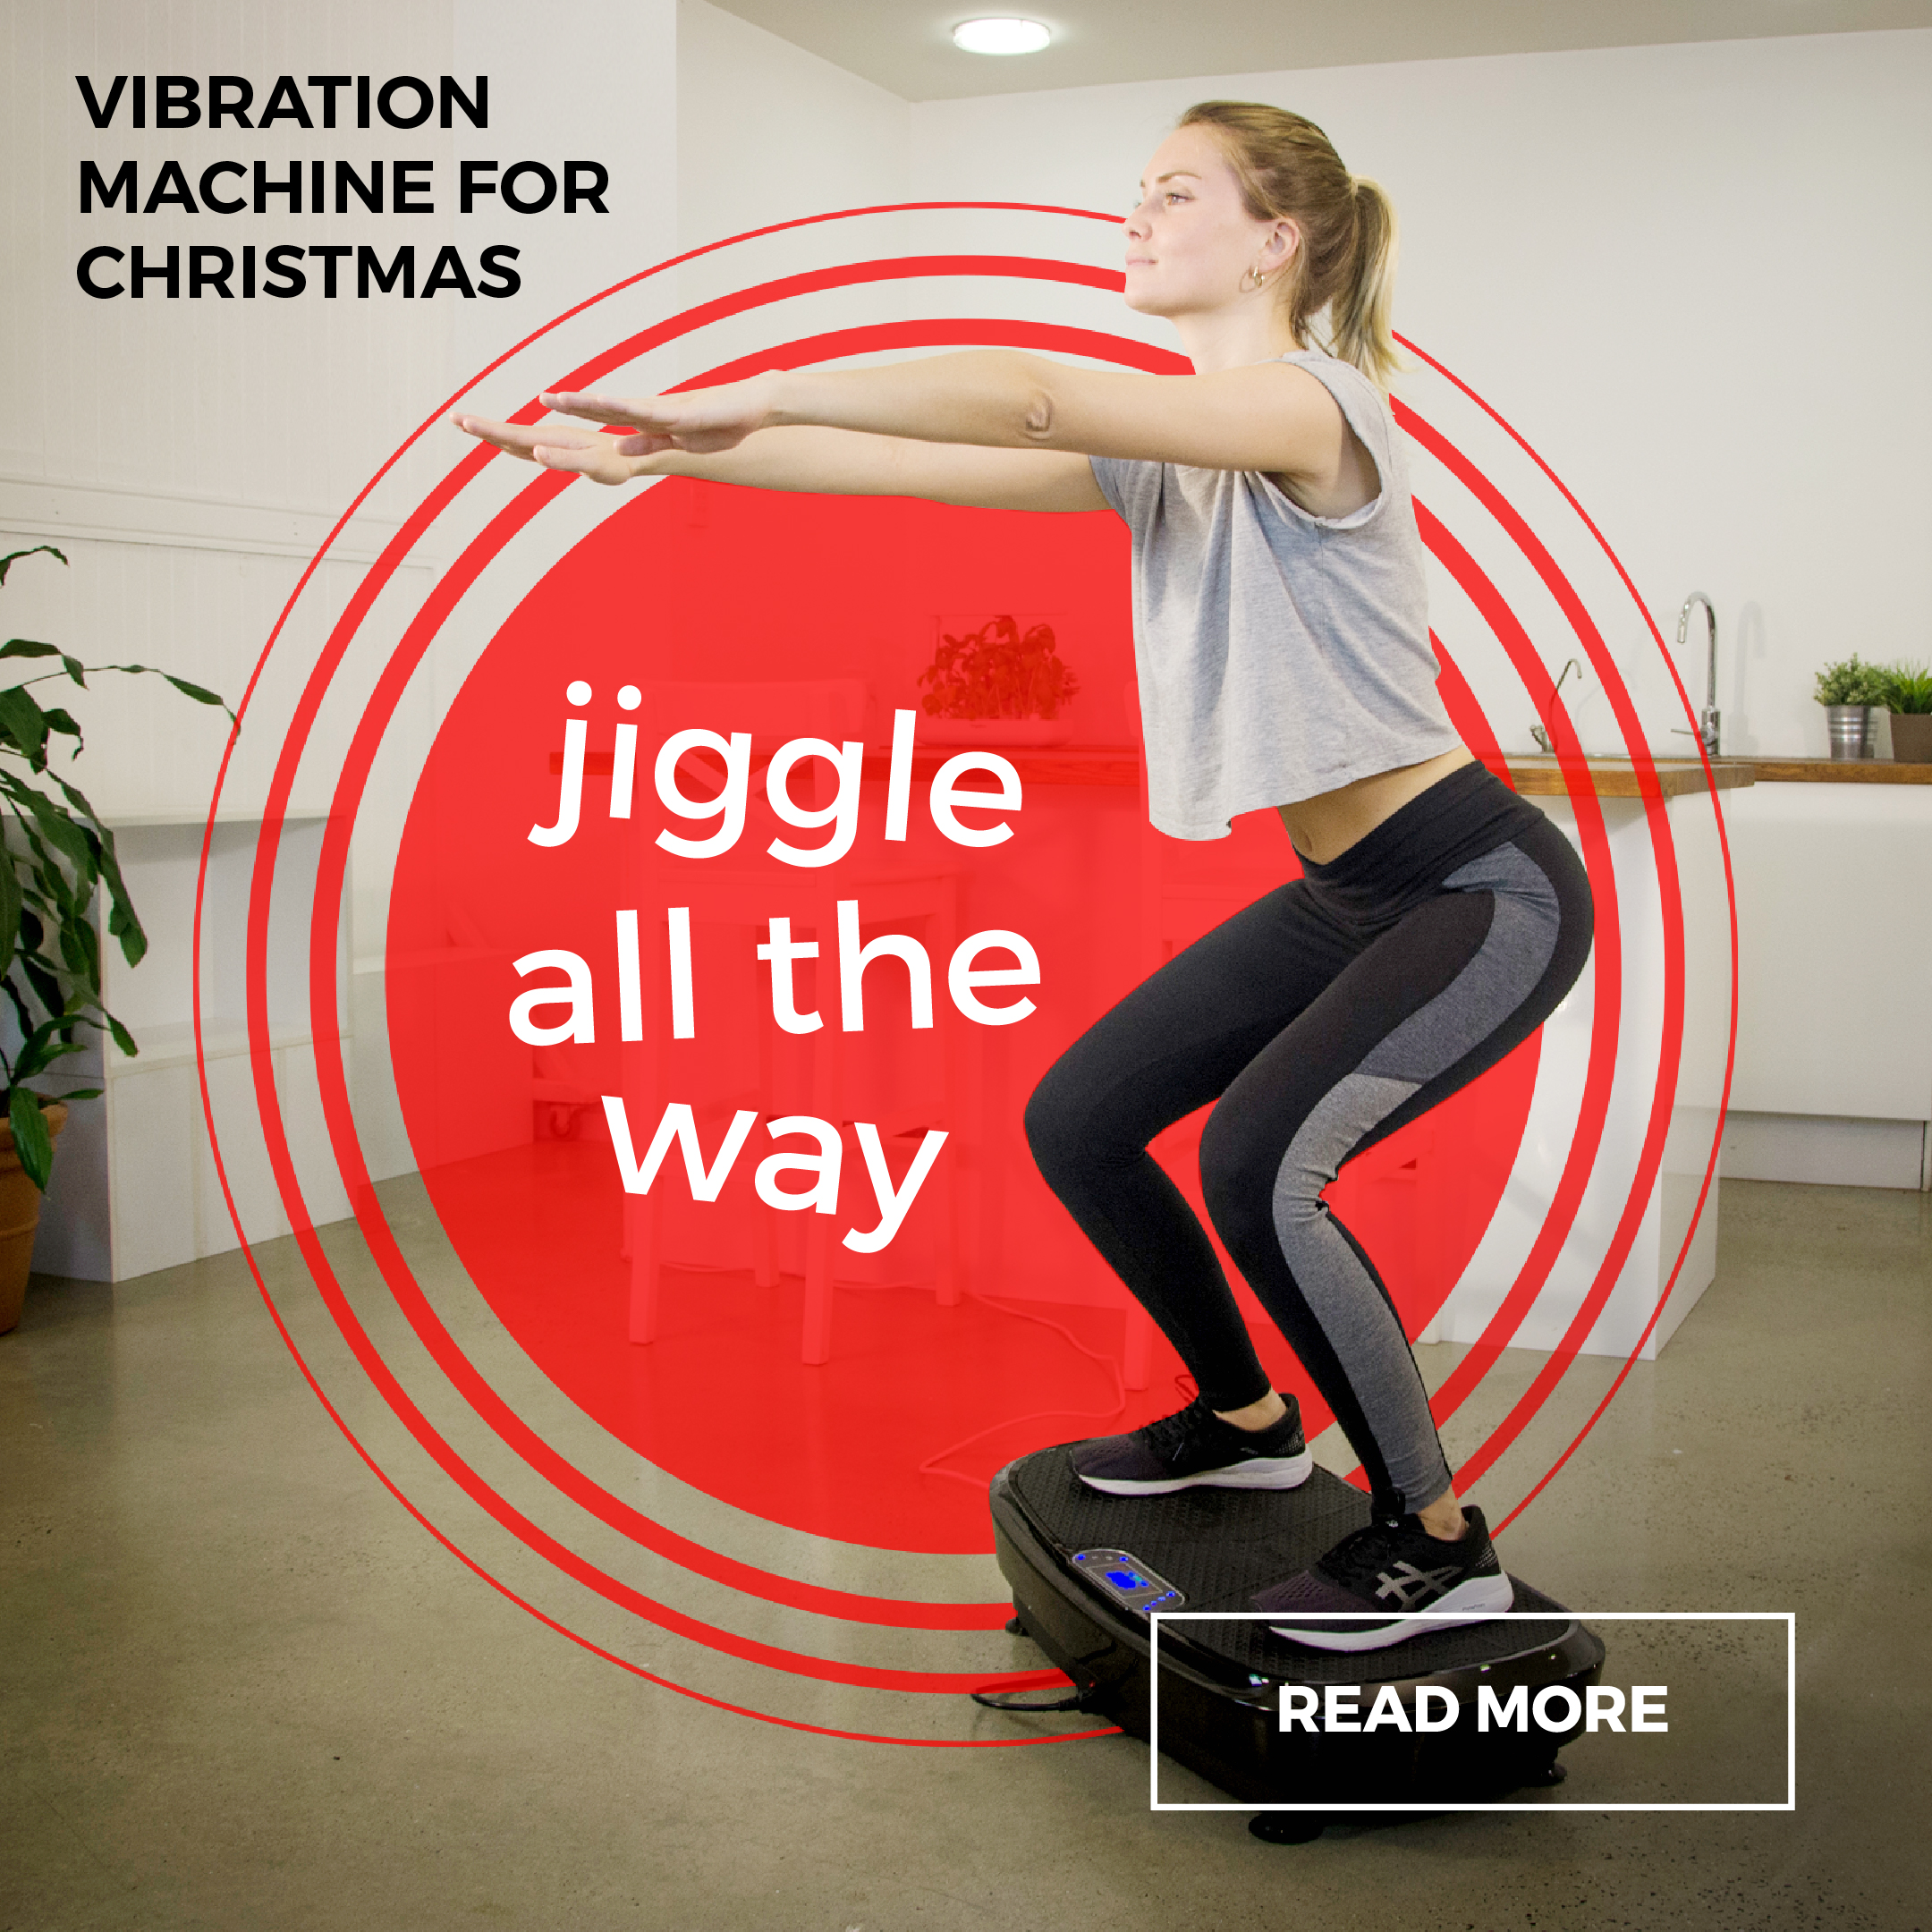 Vibration Machine for Xmas - Jiggle all the way